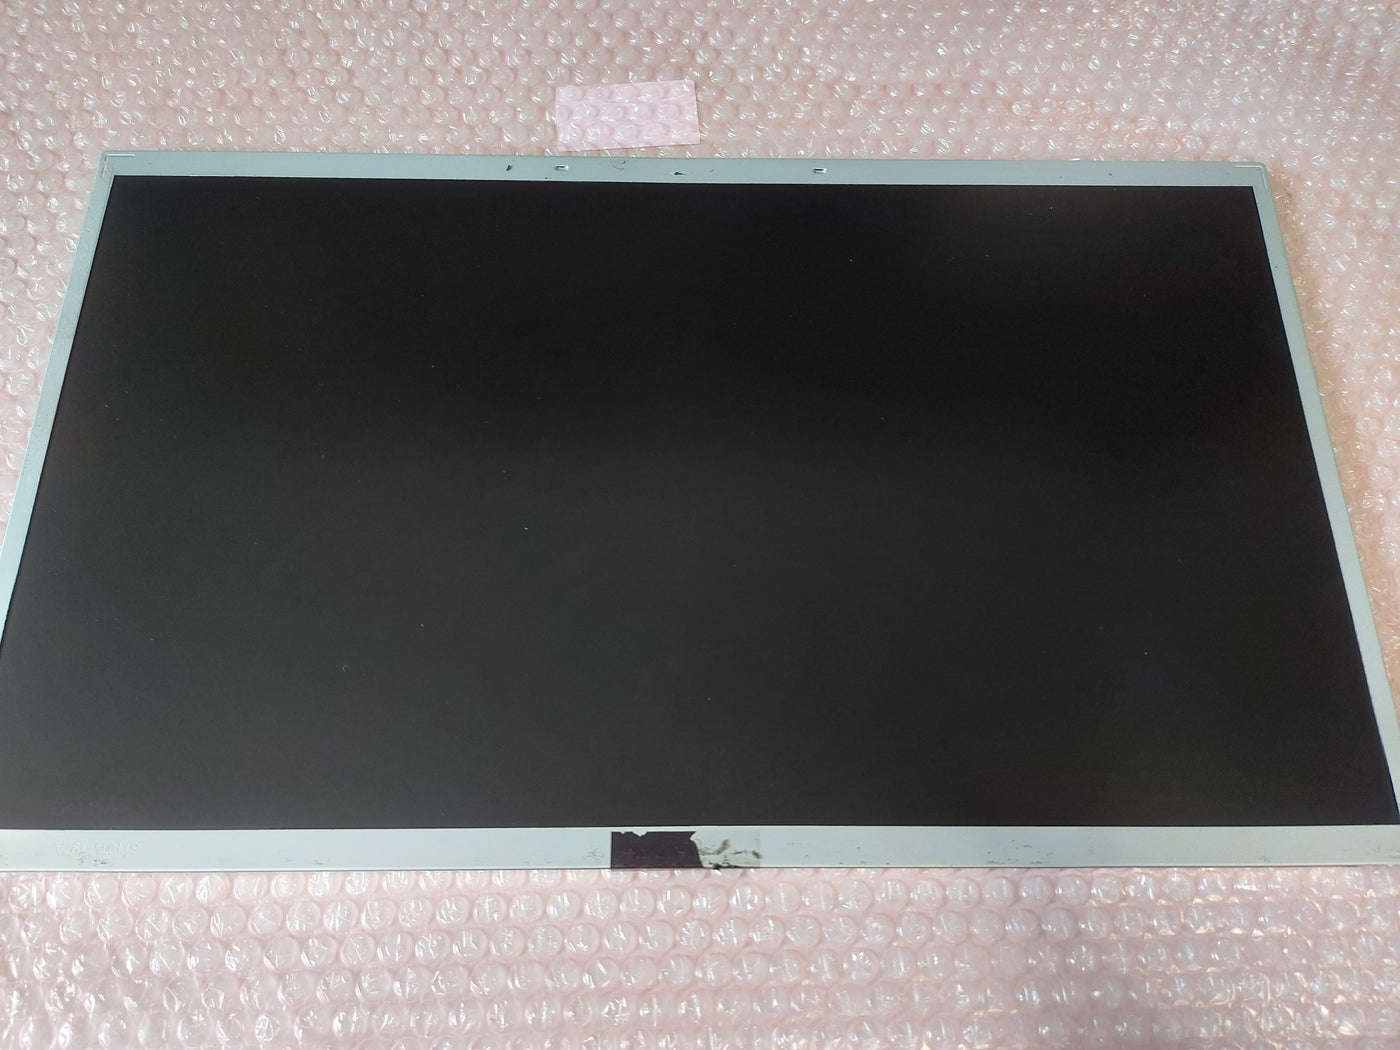 LG Dell 19.5in TFT LCD Replacement Screen - WITH METAL BRACKET ( LM195WD1 012FRM ) REF